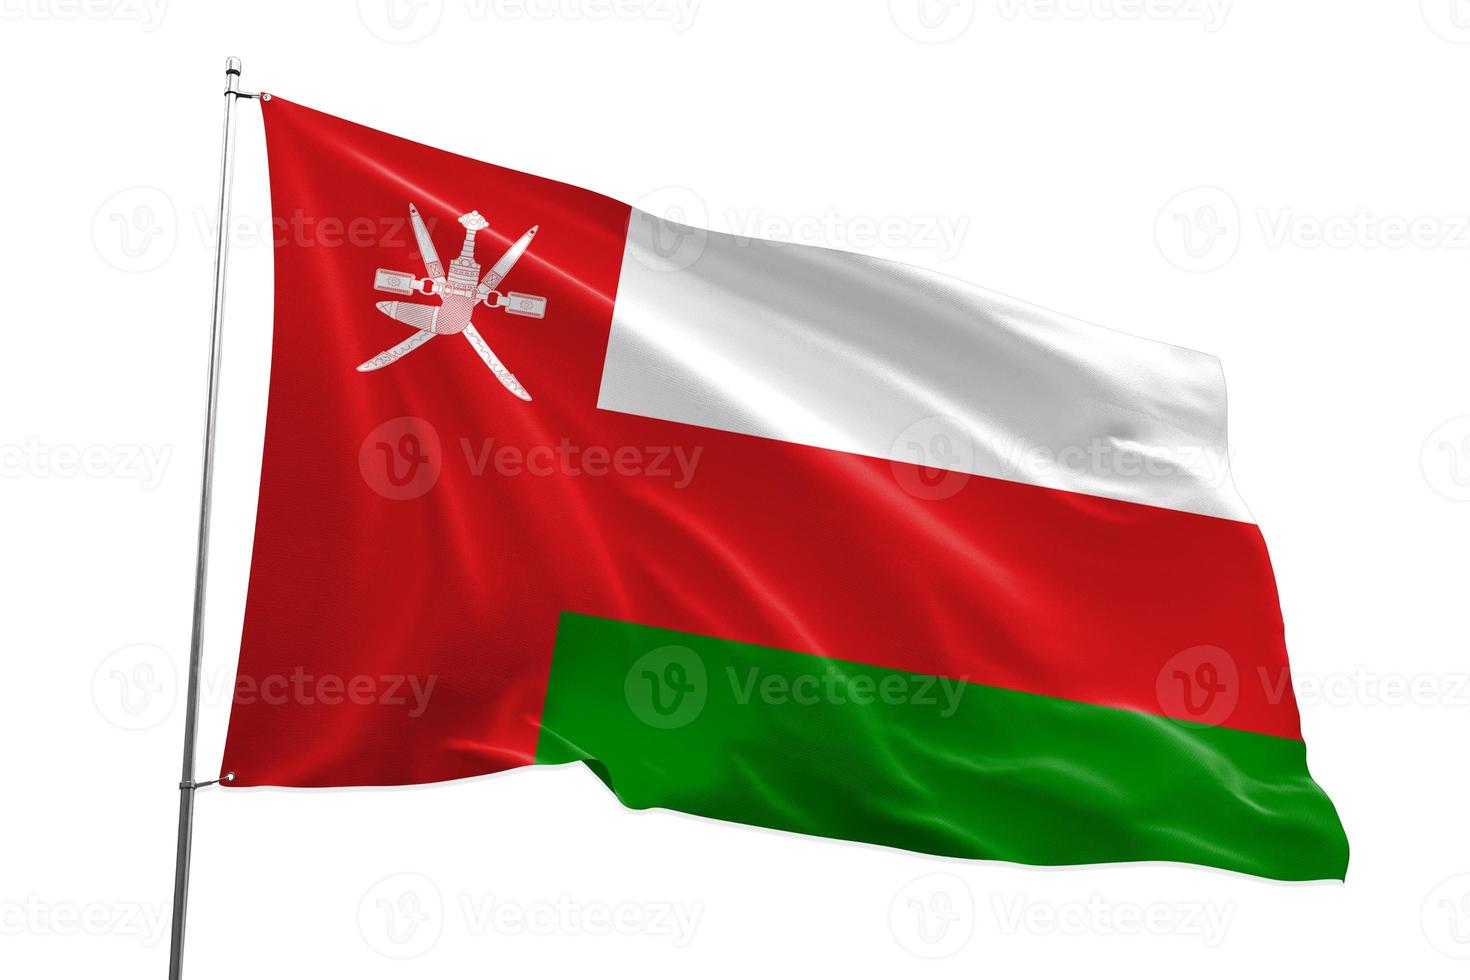 Sultanate of oman flag on a white background photo